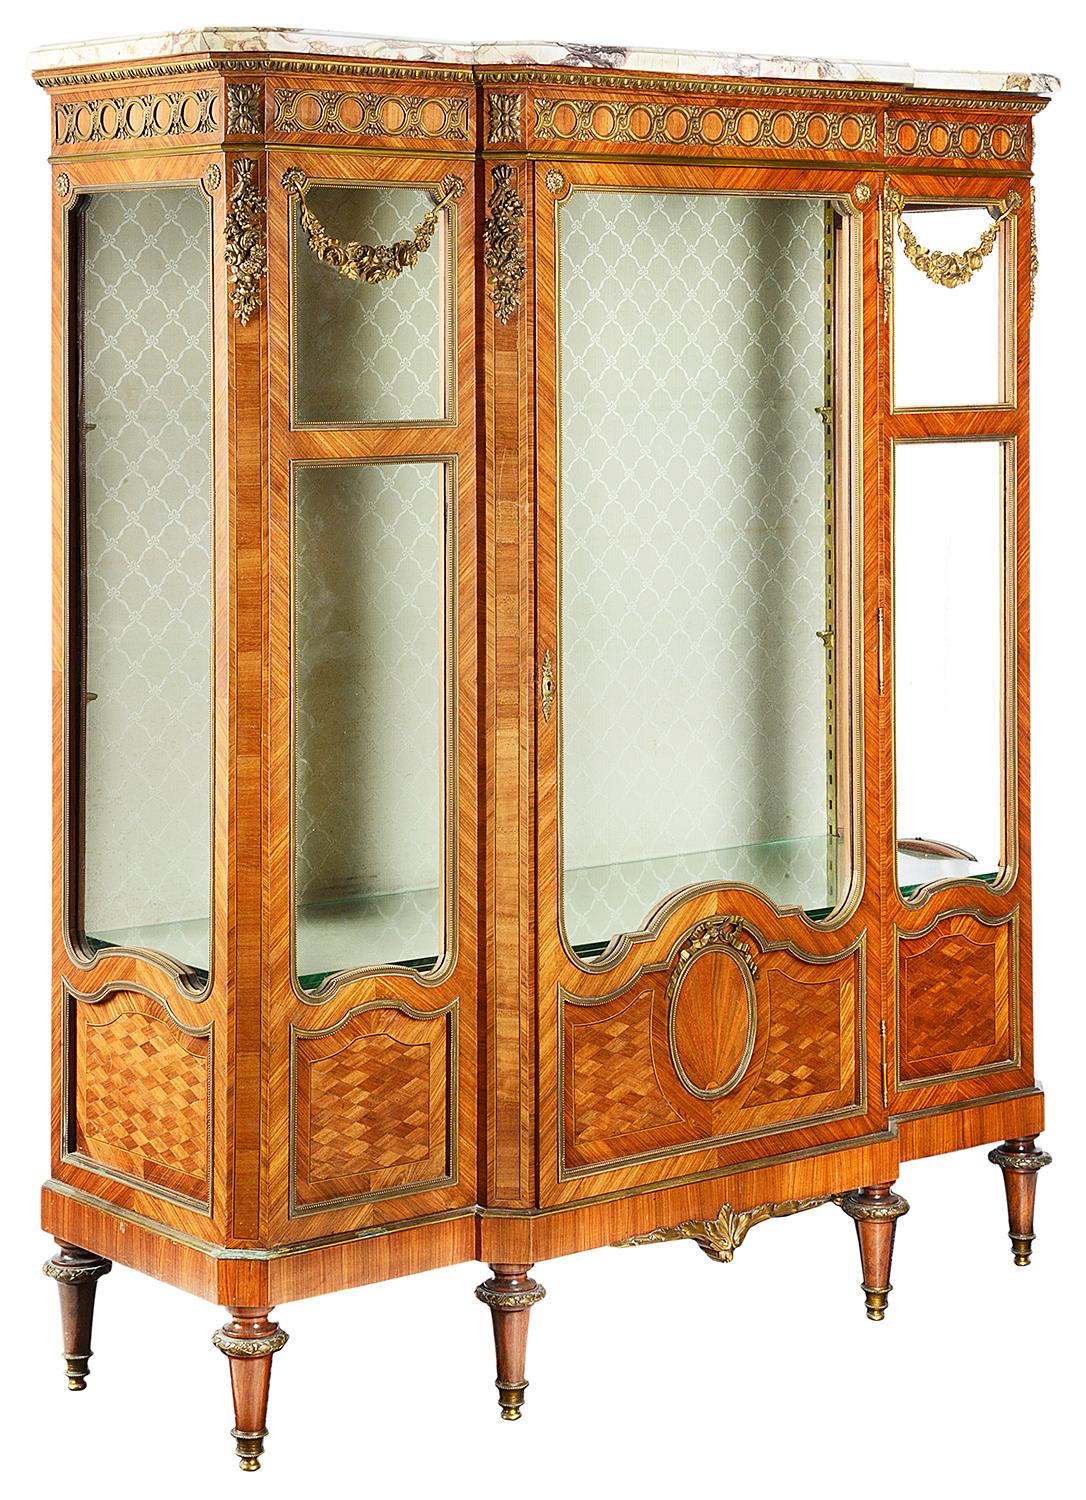 A very good quality late 19th century French Kingwood marble topped Vitrine, having wonderful gilded ormolu moldings, mounts with floral swags. A central door opening to access two glazed shelves within. Wonderful parquetry inlaid panels and raised